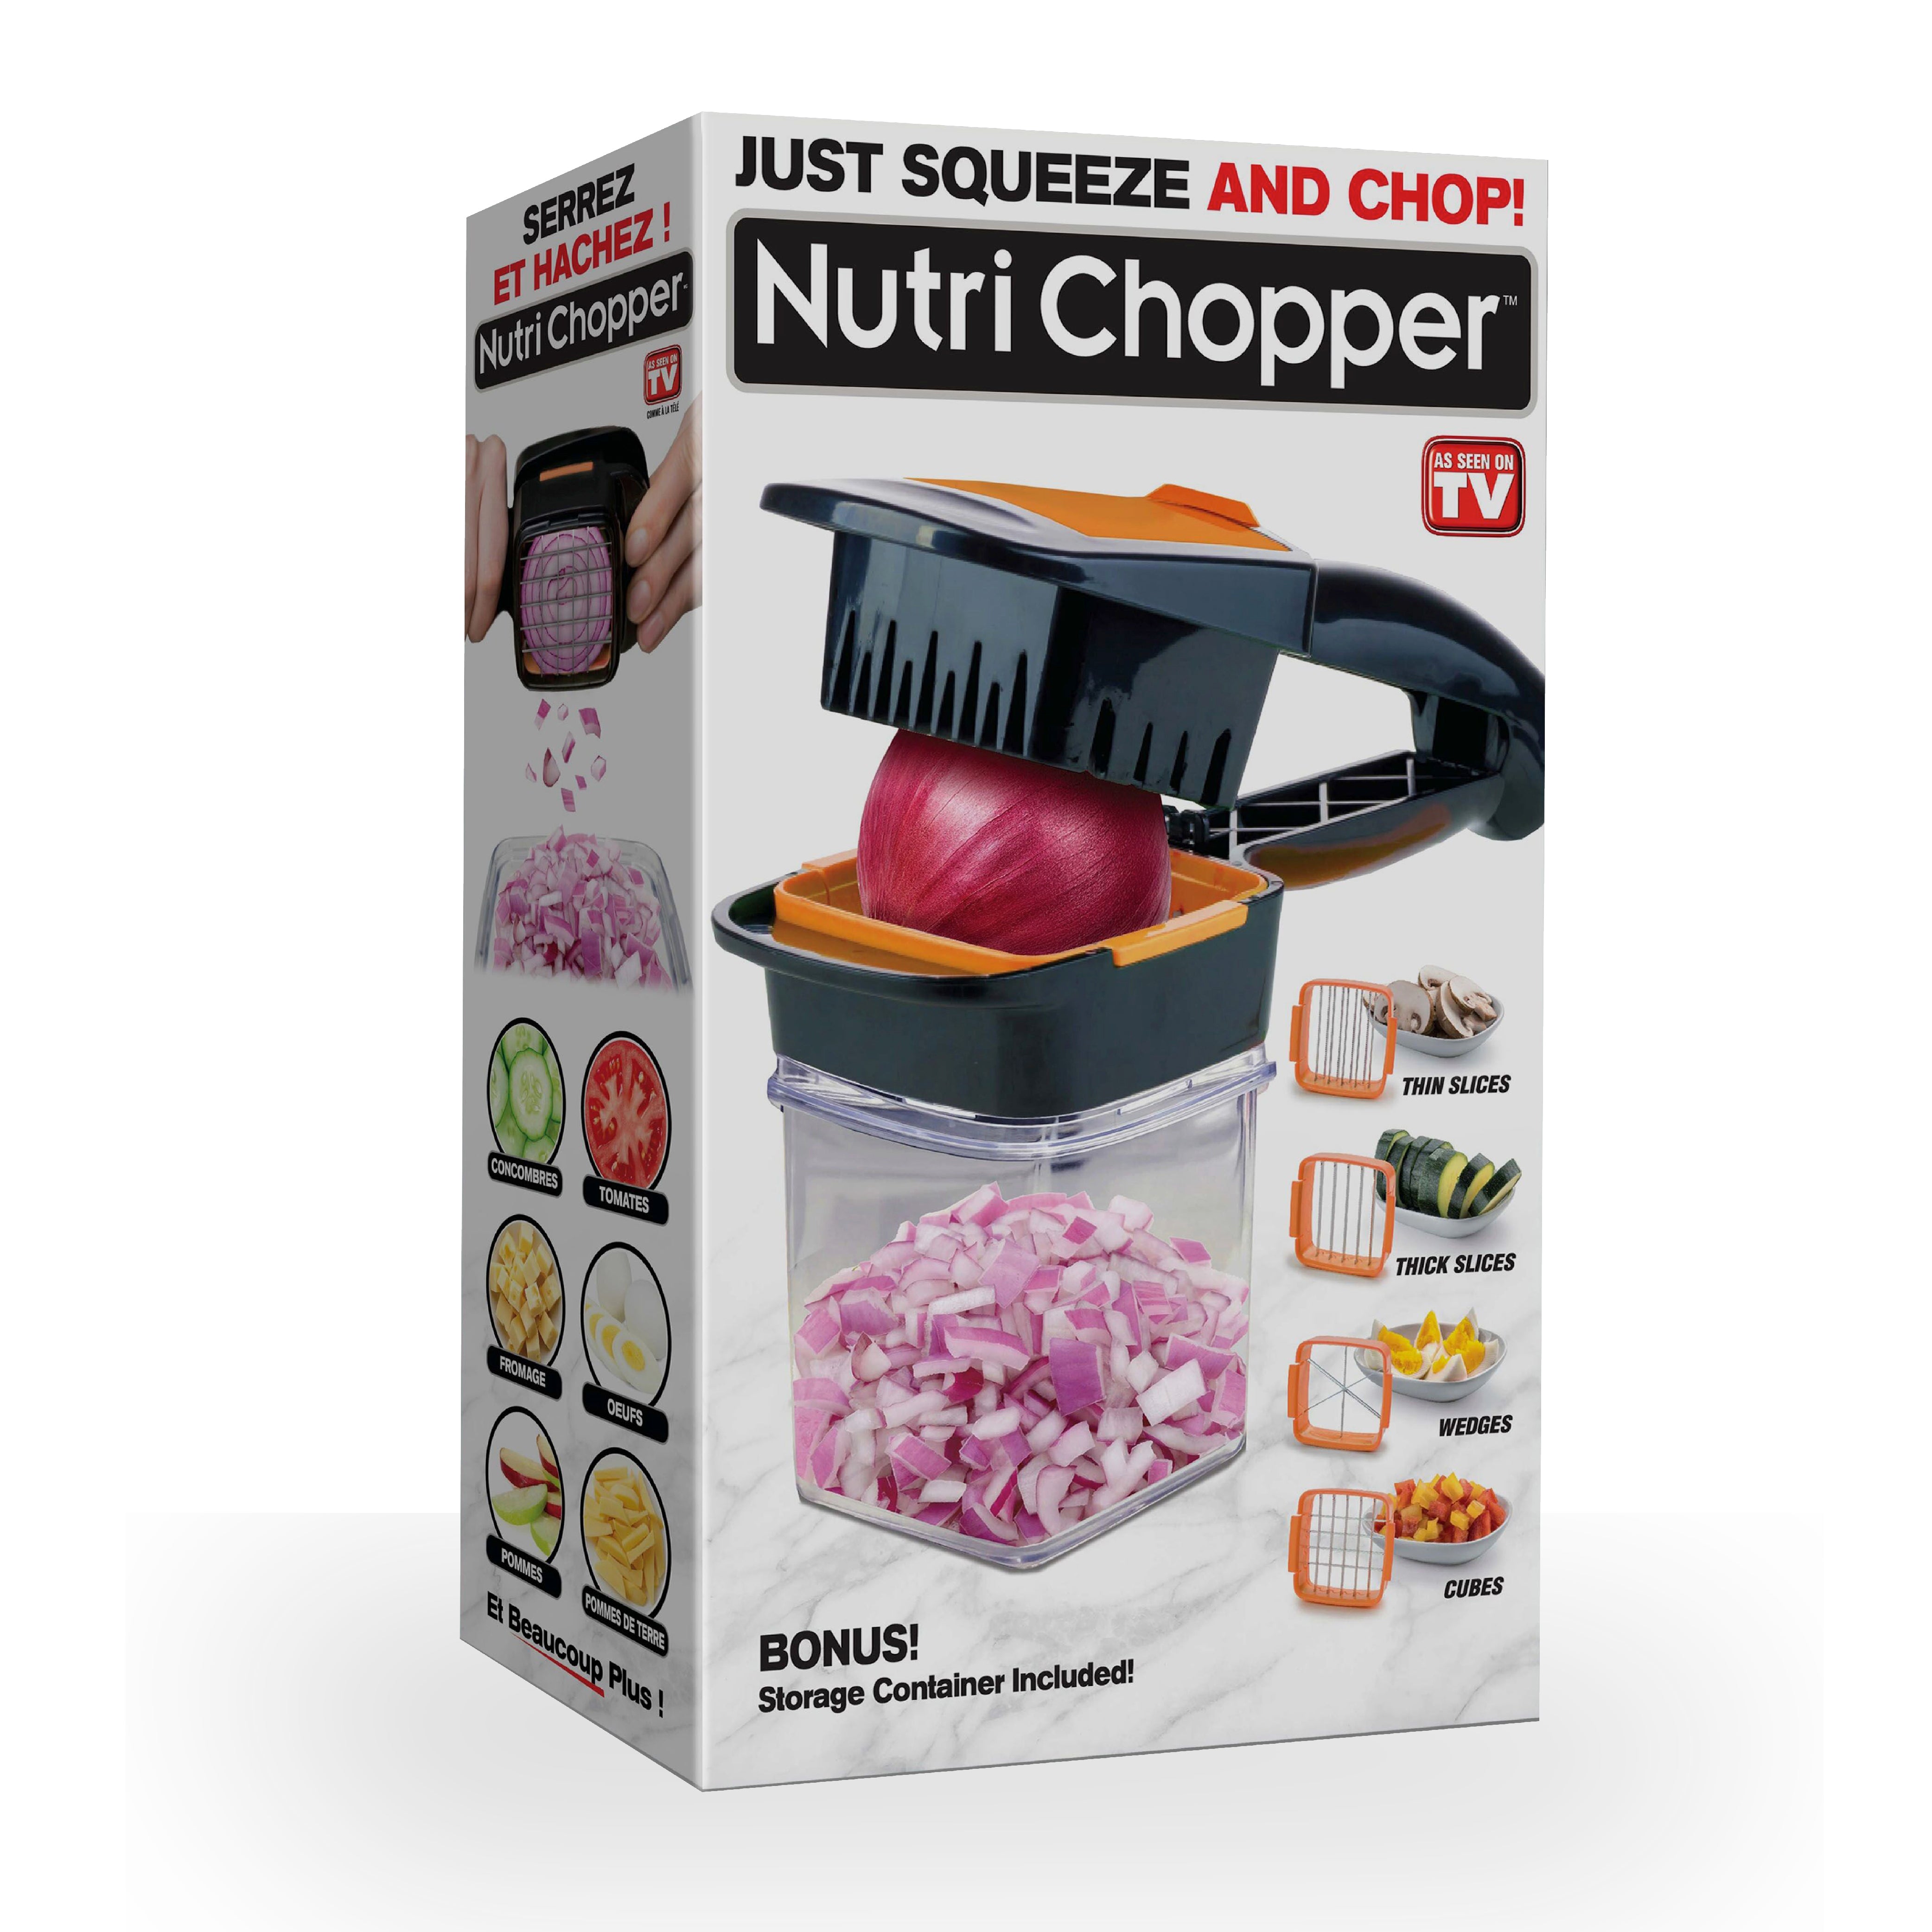 As Seen on TV NutriSlicer 3-in-1 Spinning/Rotating Mandoline and